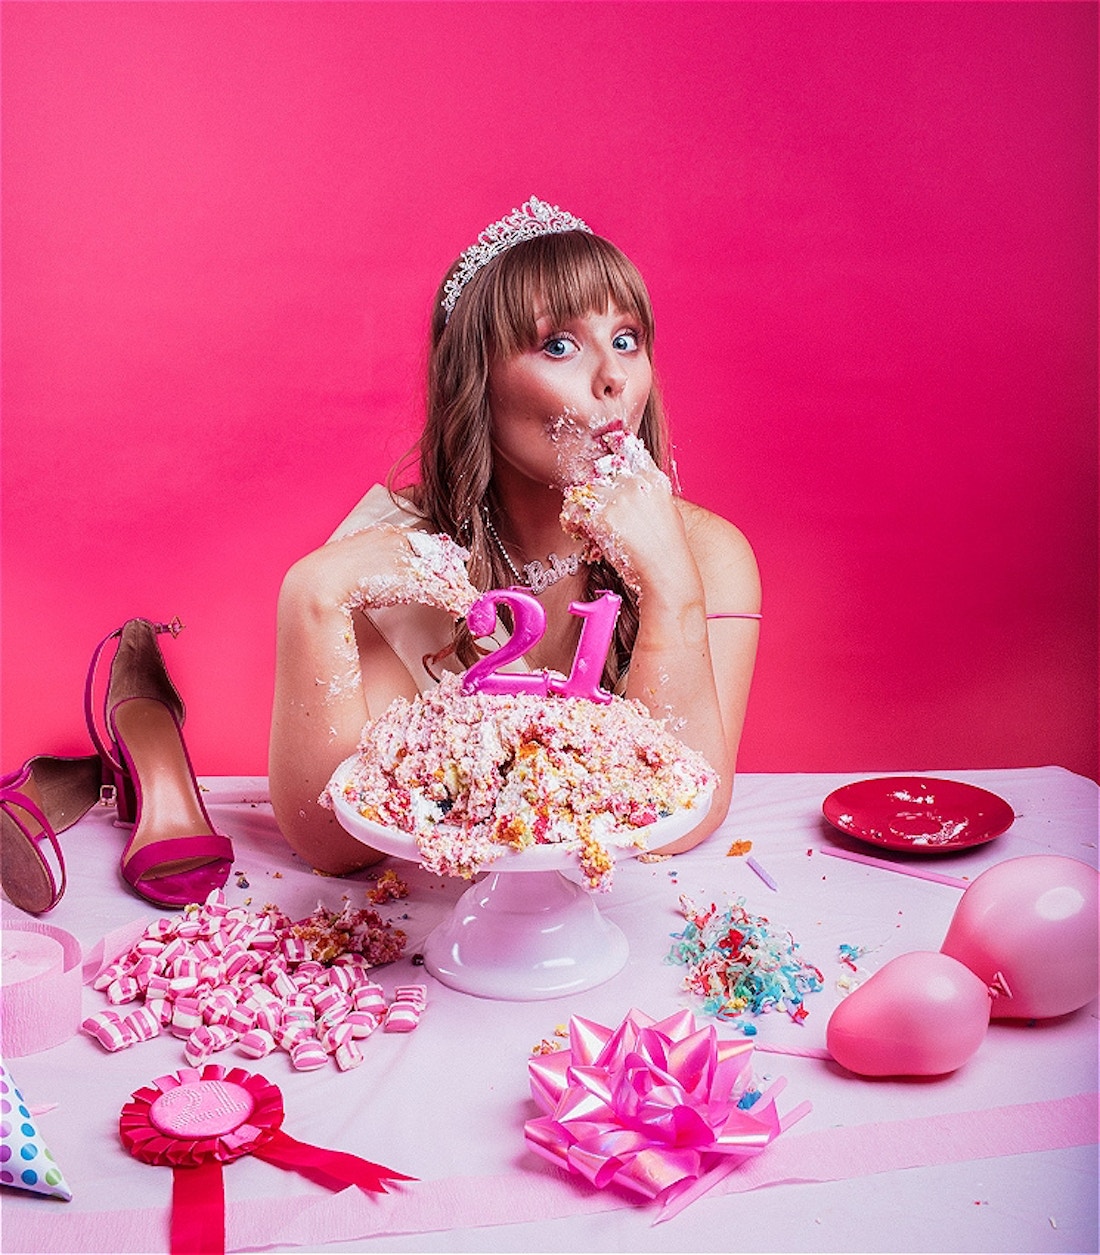 A young woman wearing a tiara is sitting at a messy table eating a birthday cake with her hands. Her face and hands are covered in cake and icing. The table is littered with candy, streamers, balloons and ribbons with candles of the number '21' sitting on top of the destroyed cake.